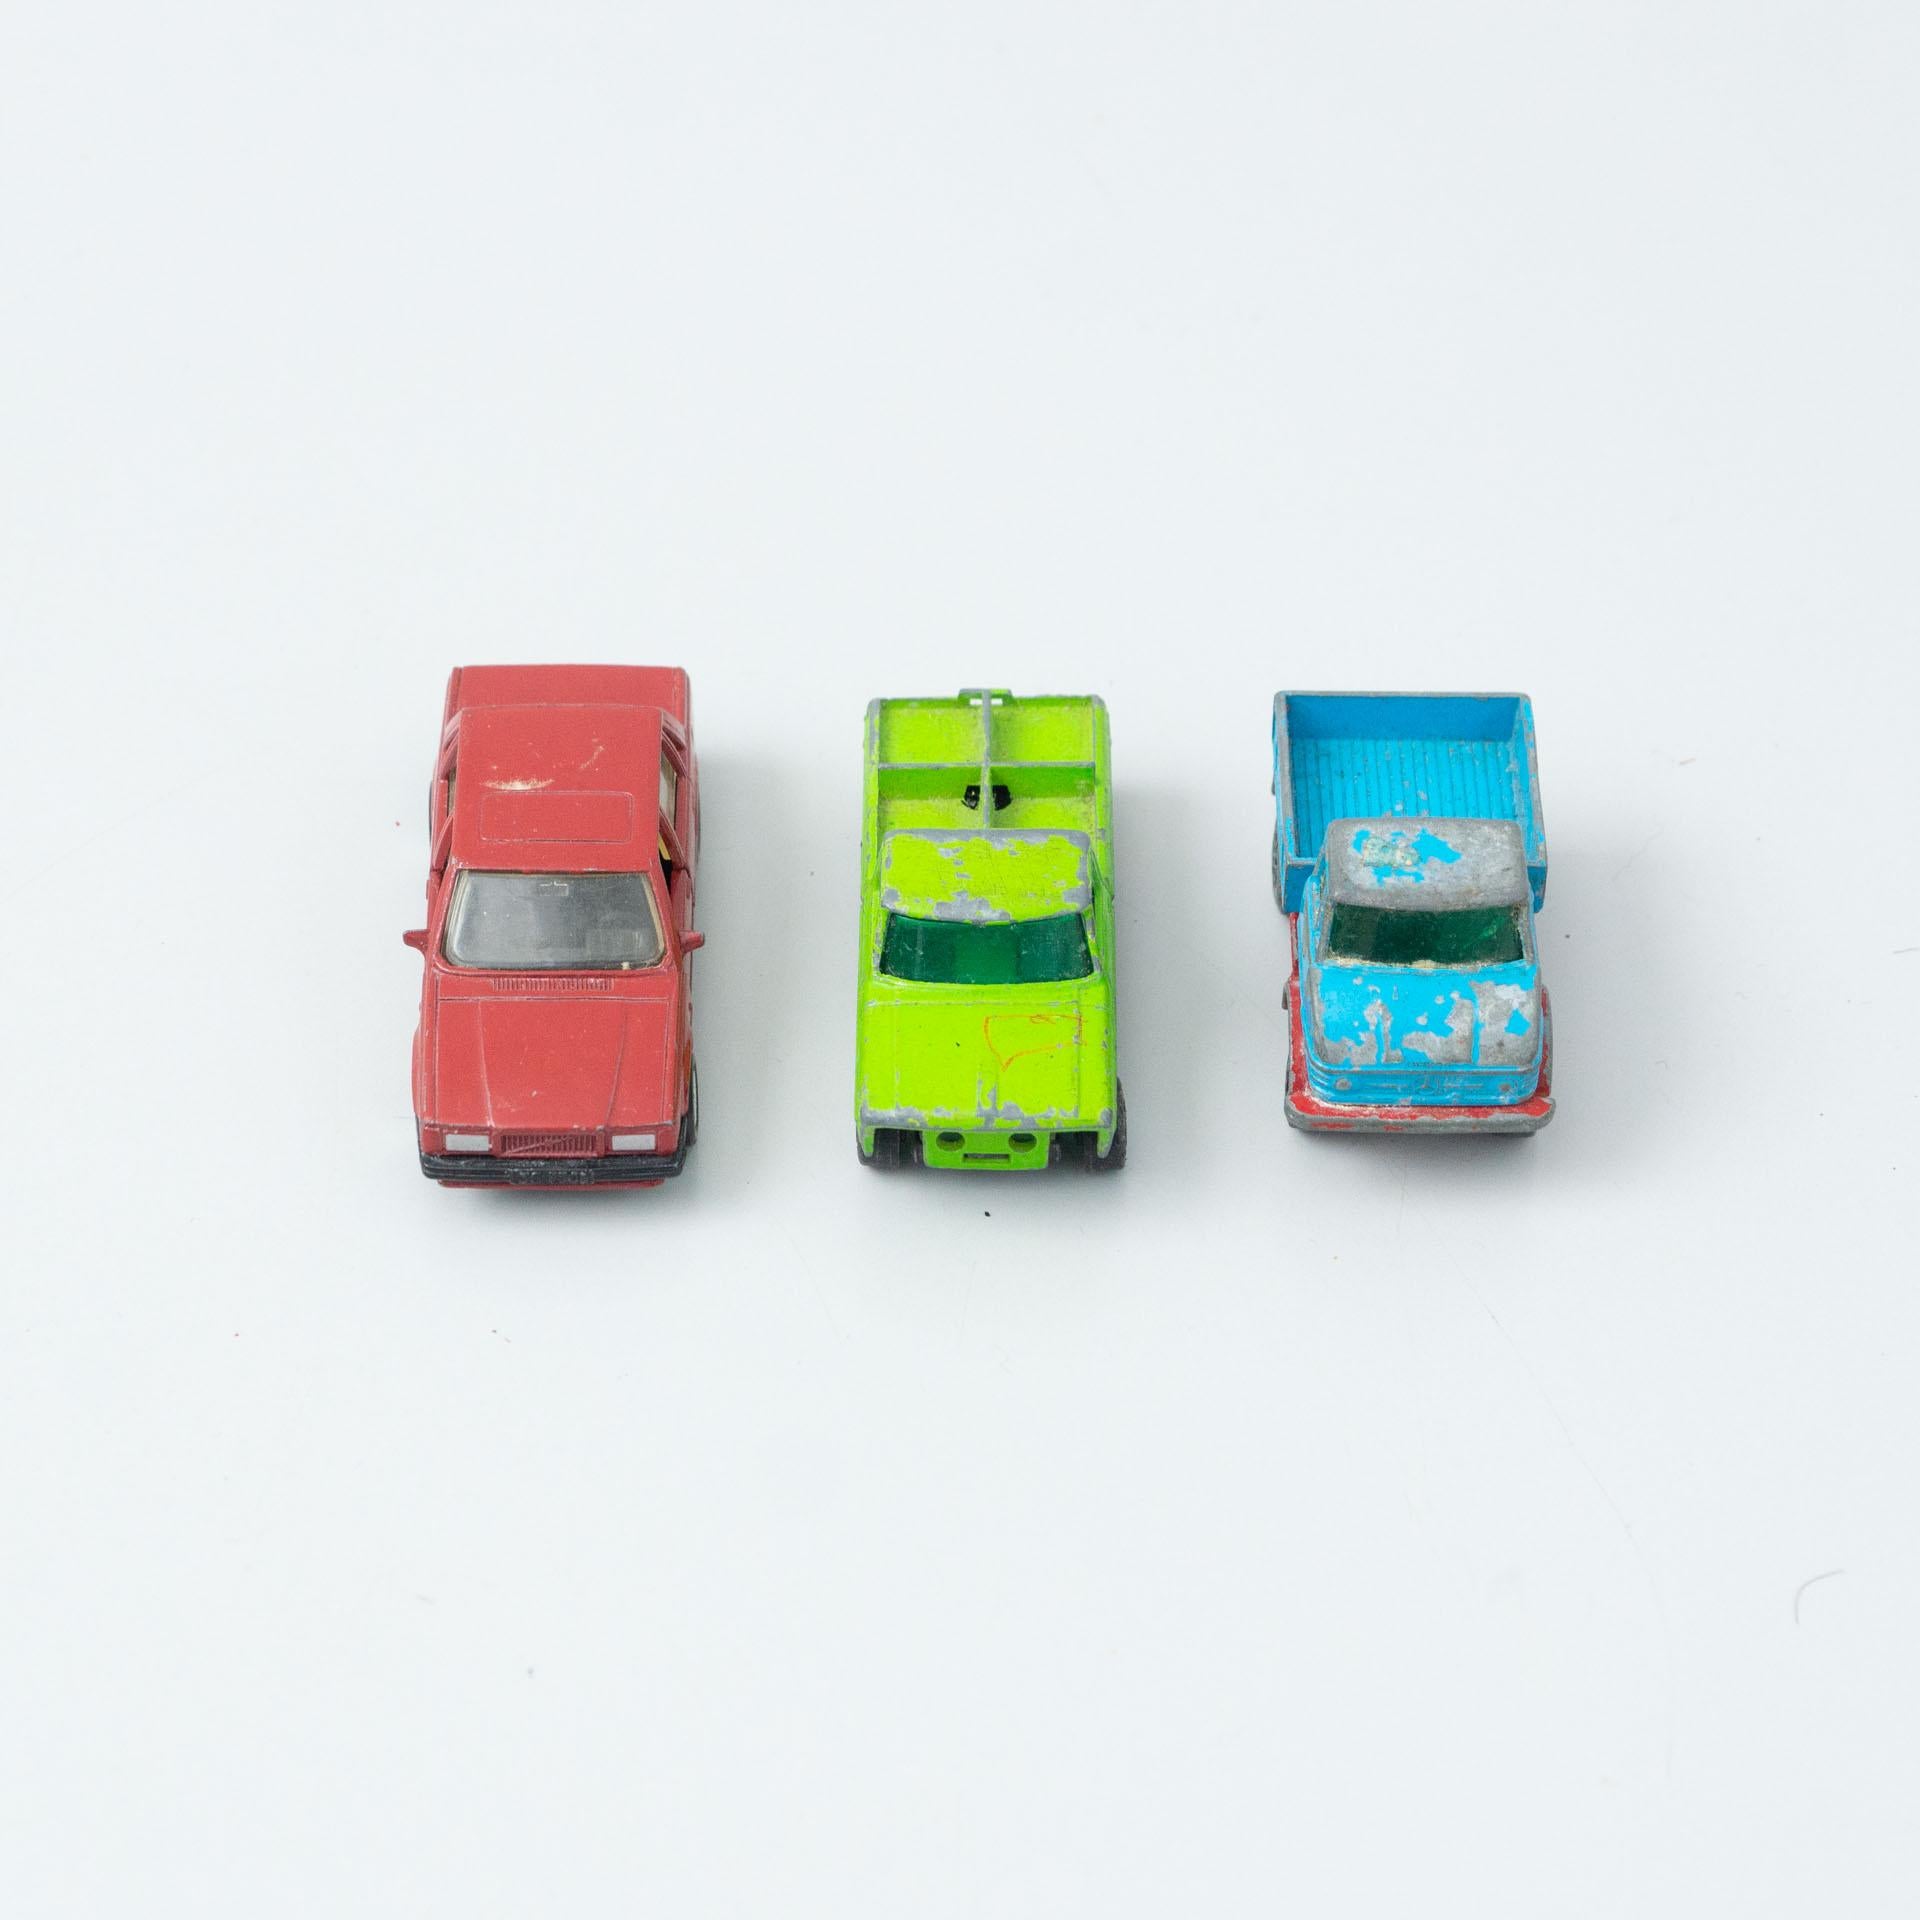 Set of three vintage toy cars.
By unknown manufacturer, circa 1960.

In original condition, with minor wear consistent with age and use, preserving a beautiful patina.

Materials:
Metal
Plastic

Dimensions (each one):
D 7.2 cm x W 3 cm x H